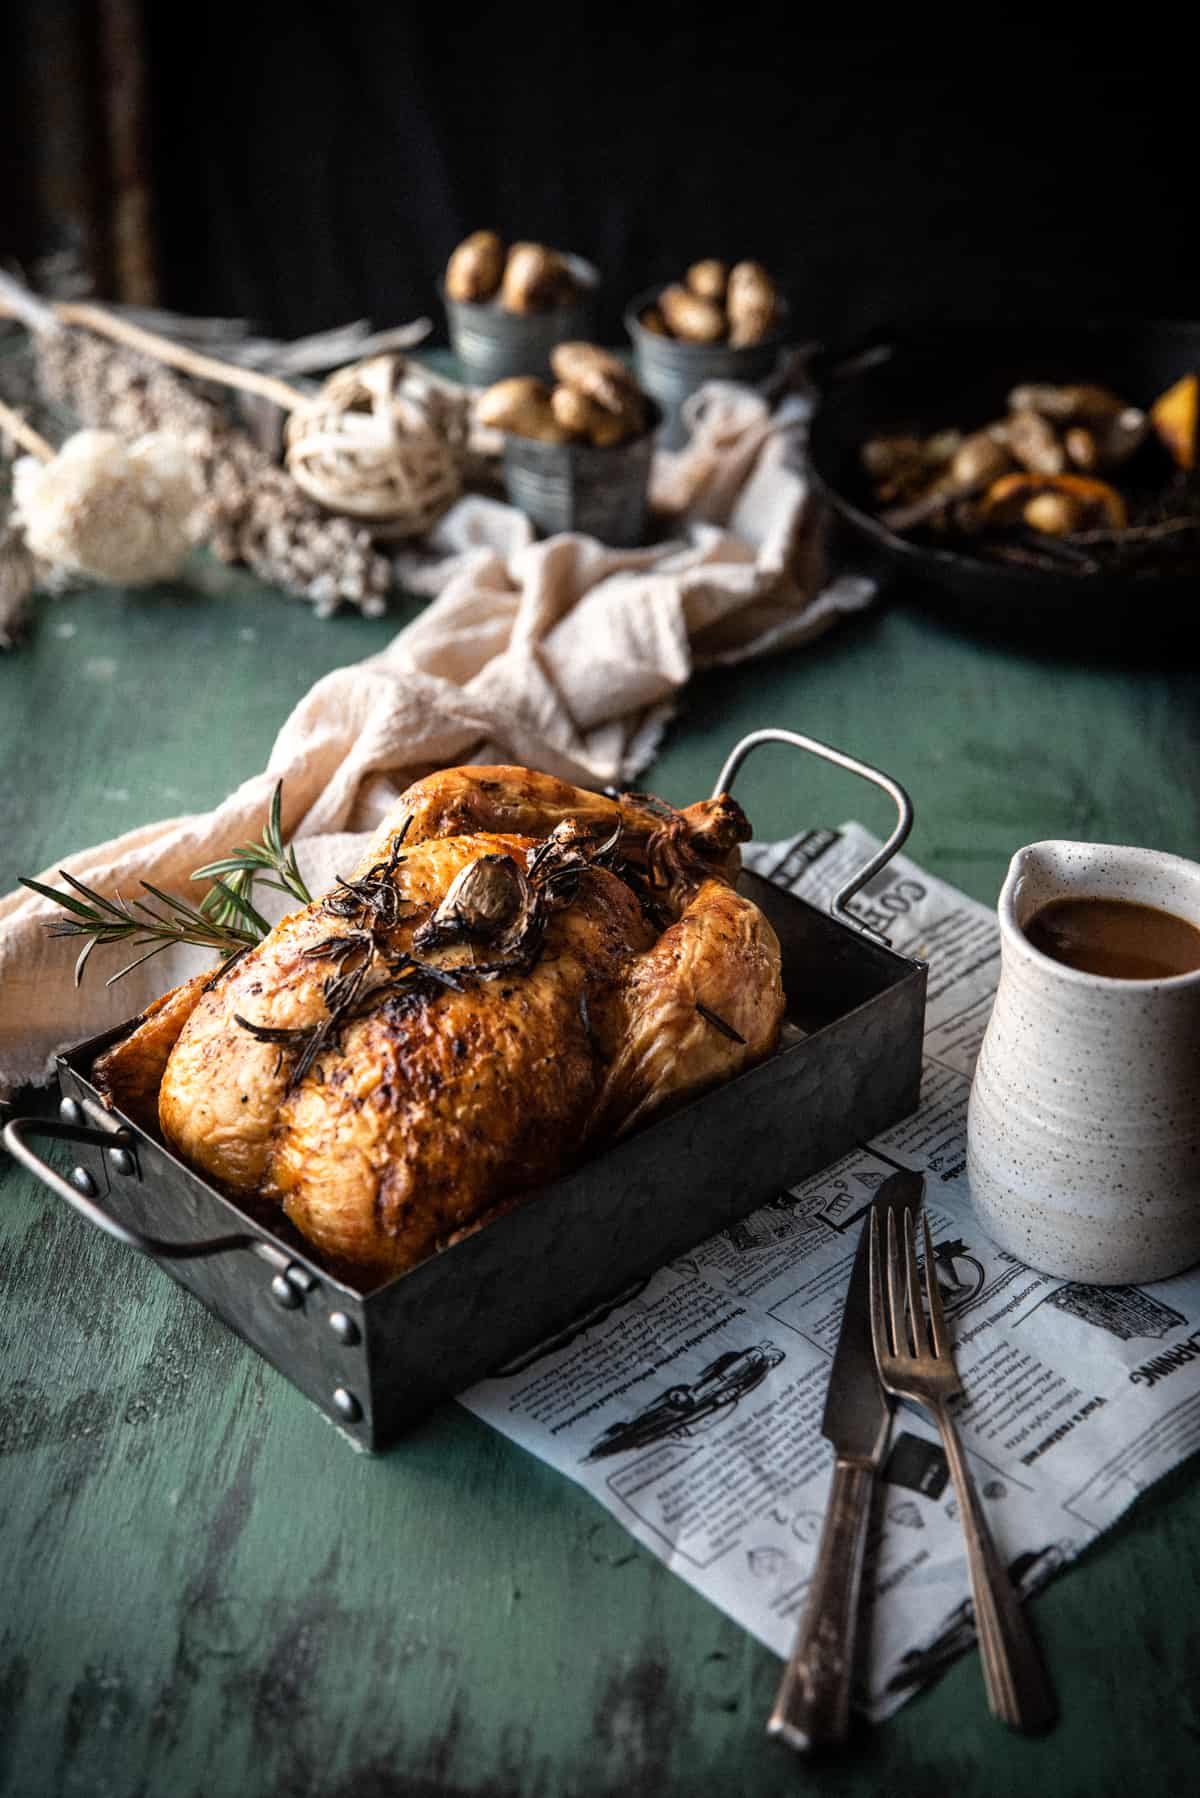 Whole roasted chicken in a stainless steel serving platter with carafe of gravy